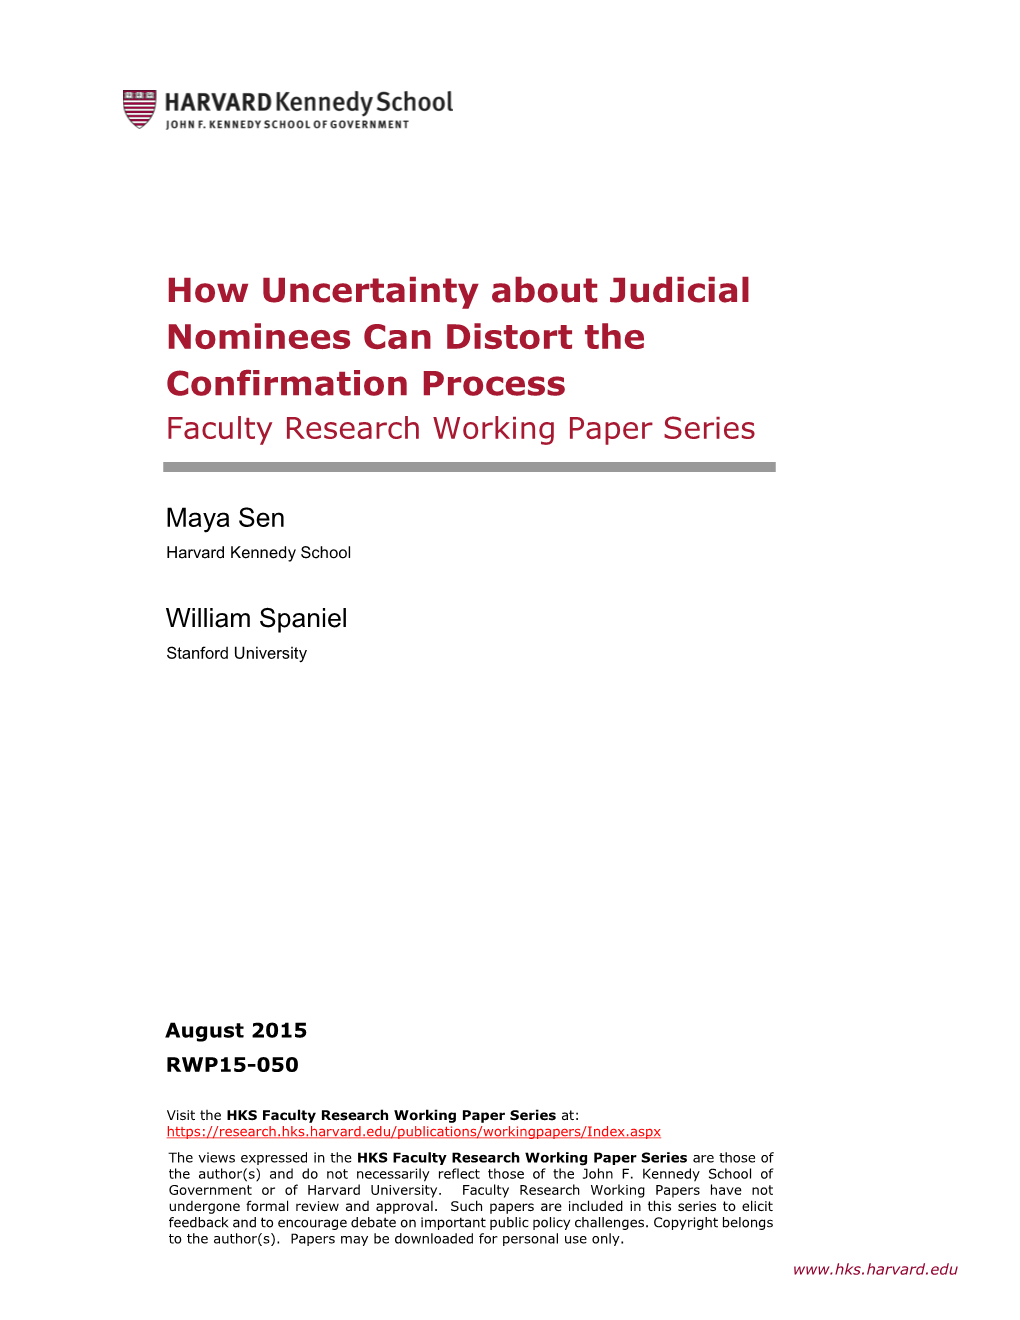 How Uncertainty About Judicial Nominees Can Distort the Confirmation Process Faculty Research Working Paper Series